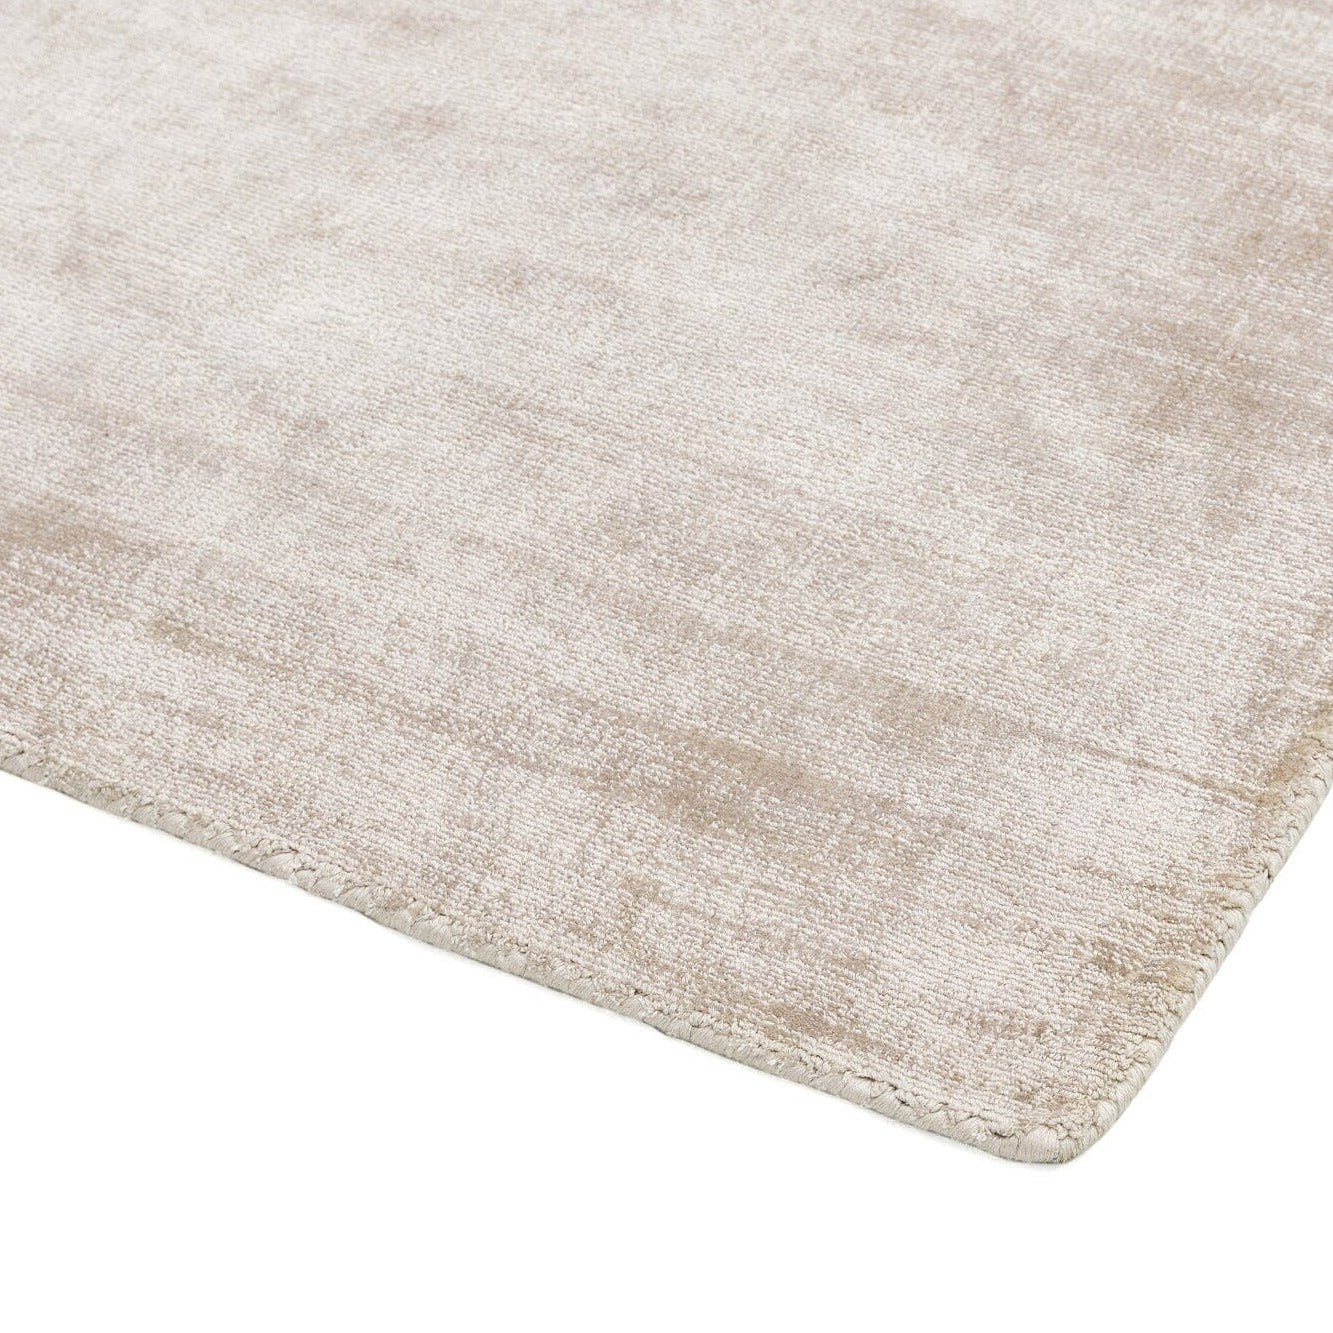 Asiatic Carpets Blade Hand Woven Rug Putty - 160 x 230cm